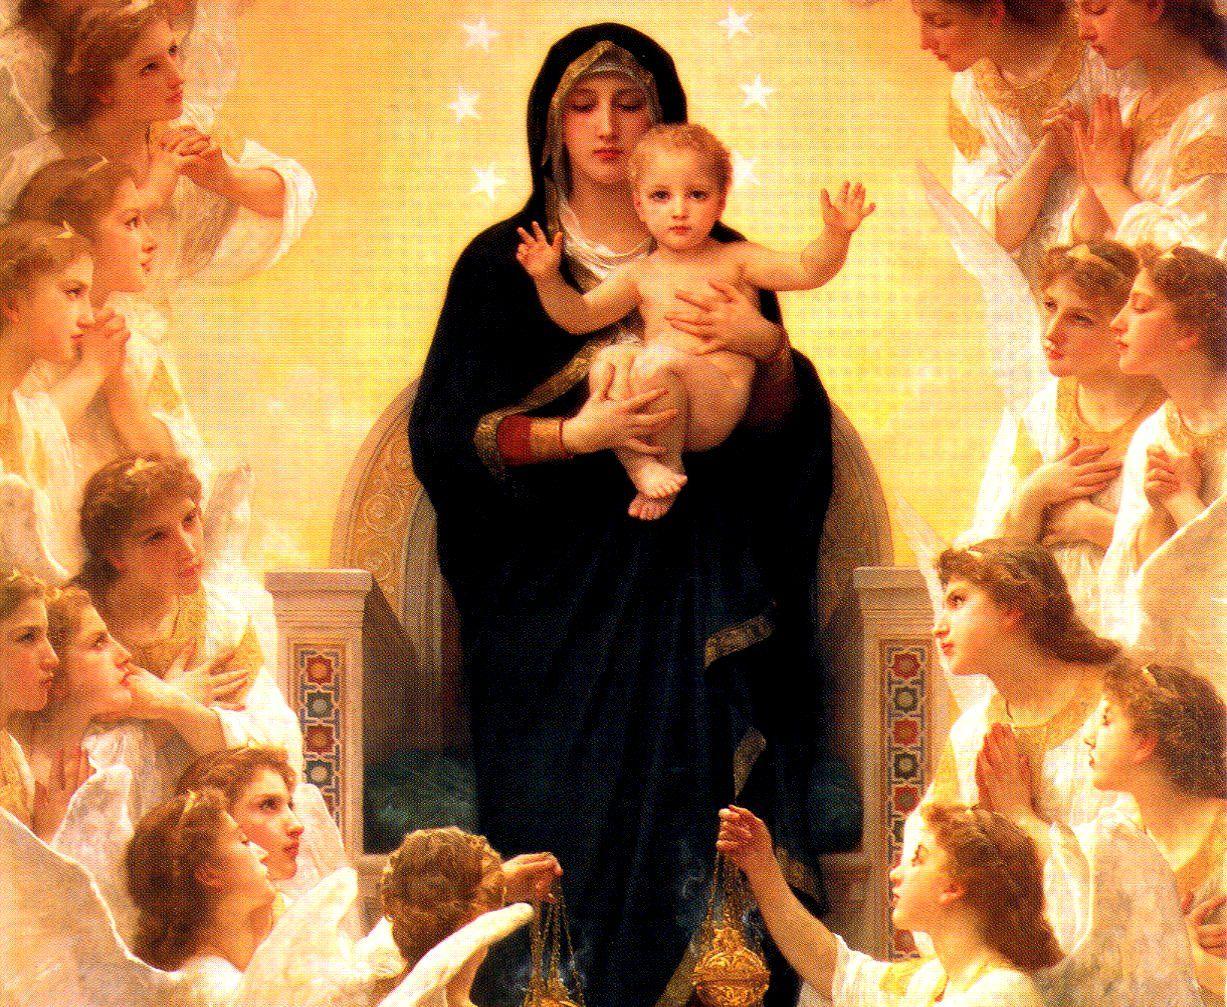 Mother Mary caring child Jesus Picture. Free Christian Wallpaper